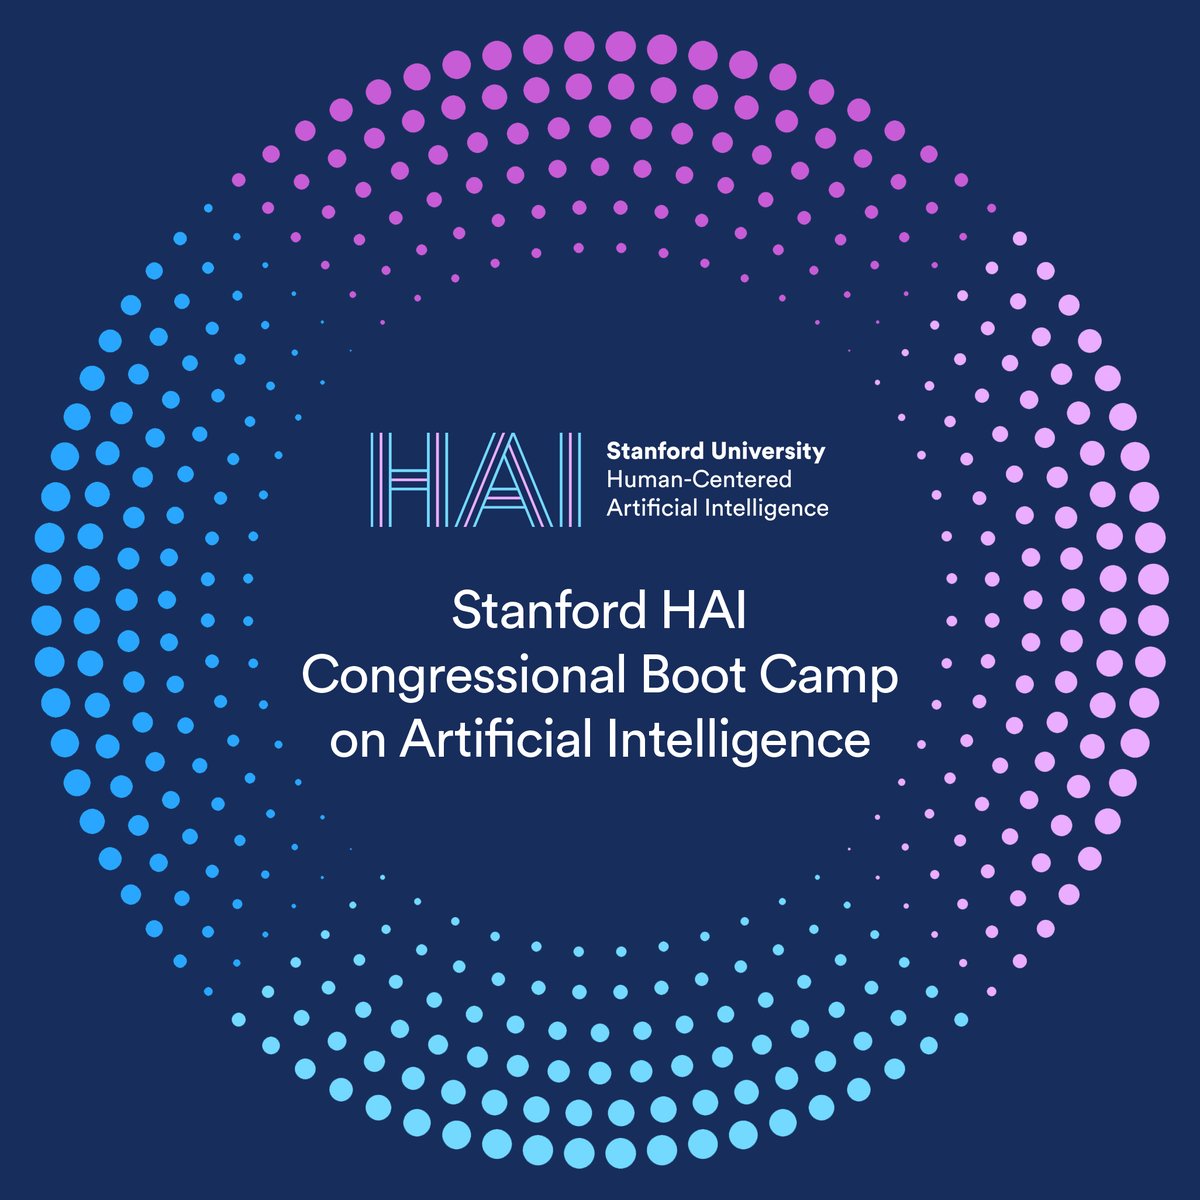 August 2022: We launched the Congressional Bootcamp on AI for lawmakers to learn from leading scholars and think critically about regulating and governing emerging tech. #MondayMilestones 15/n
hai.stanford.edu/congressional-…